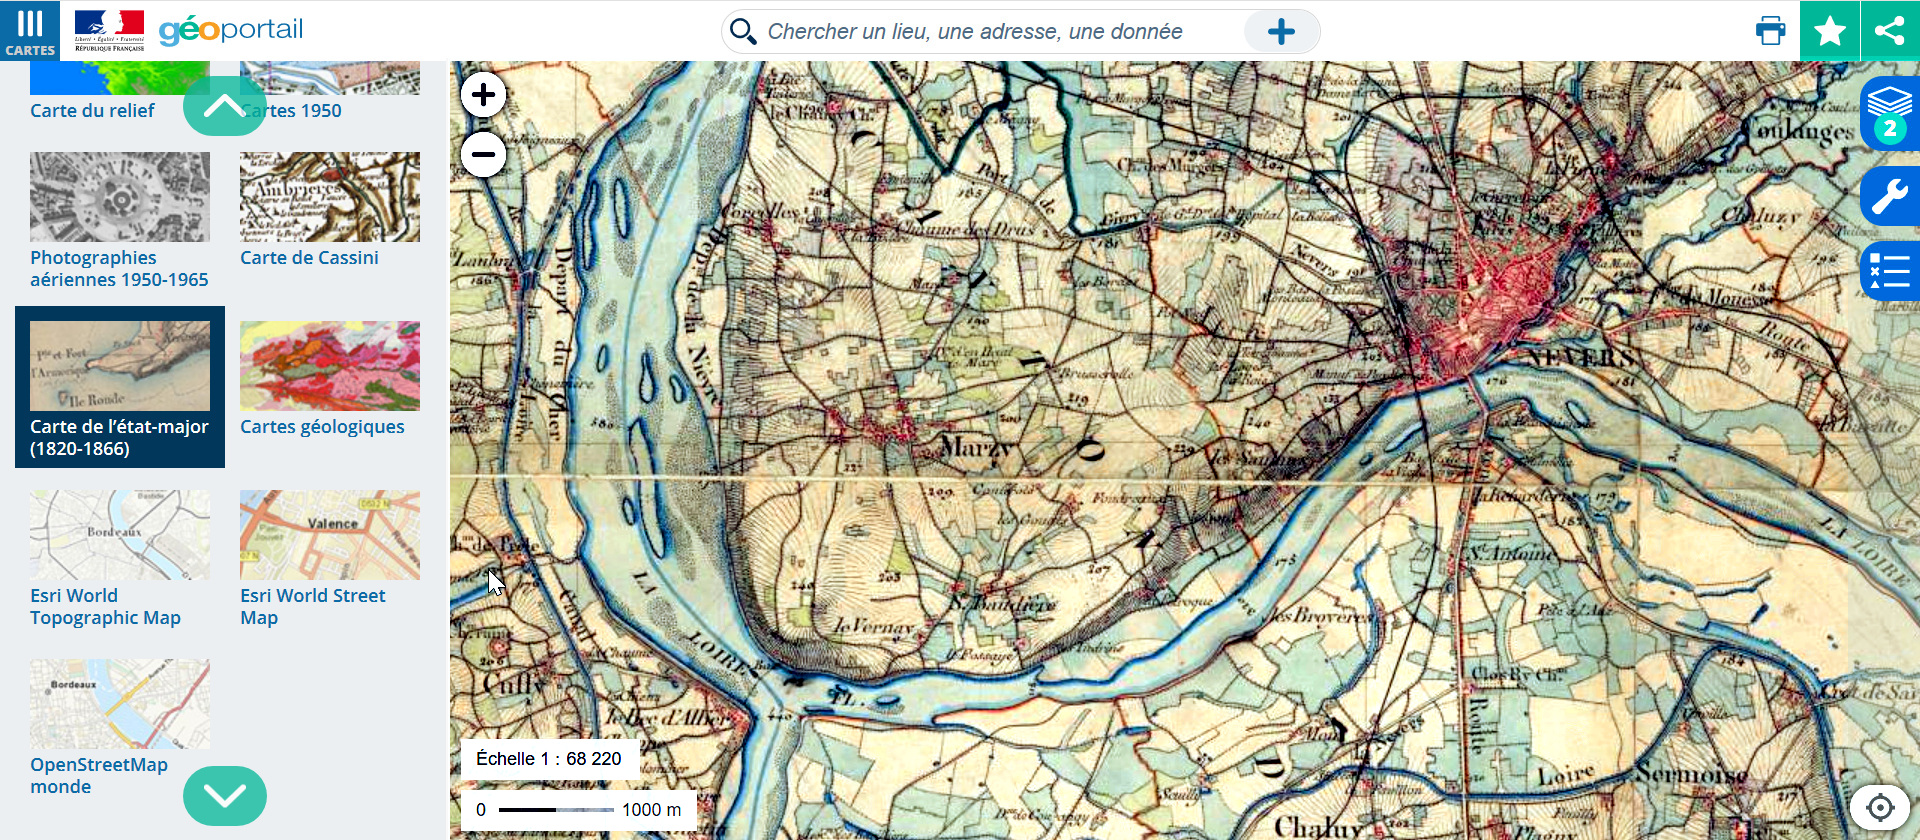 ry survey map on the Geoportail website